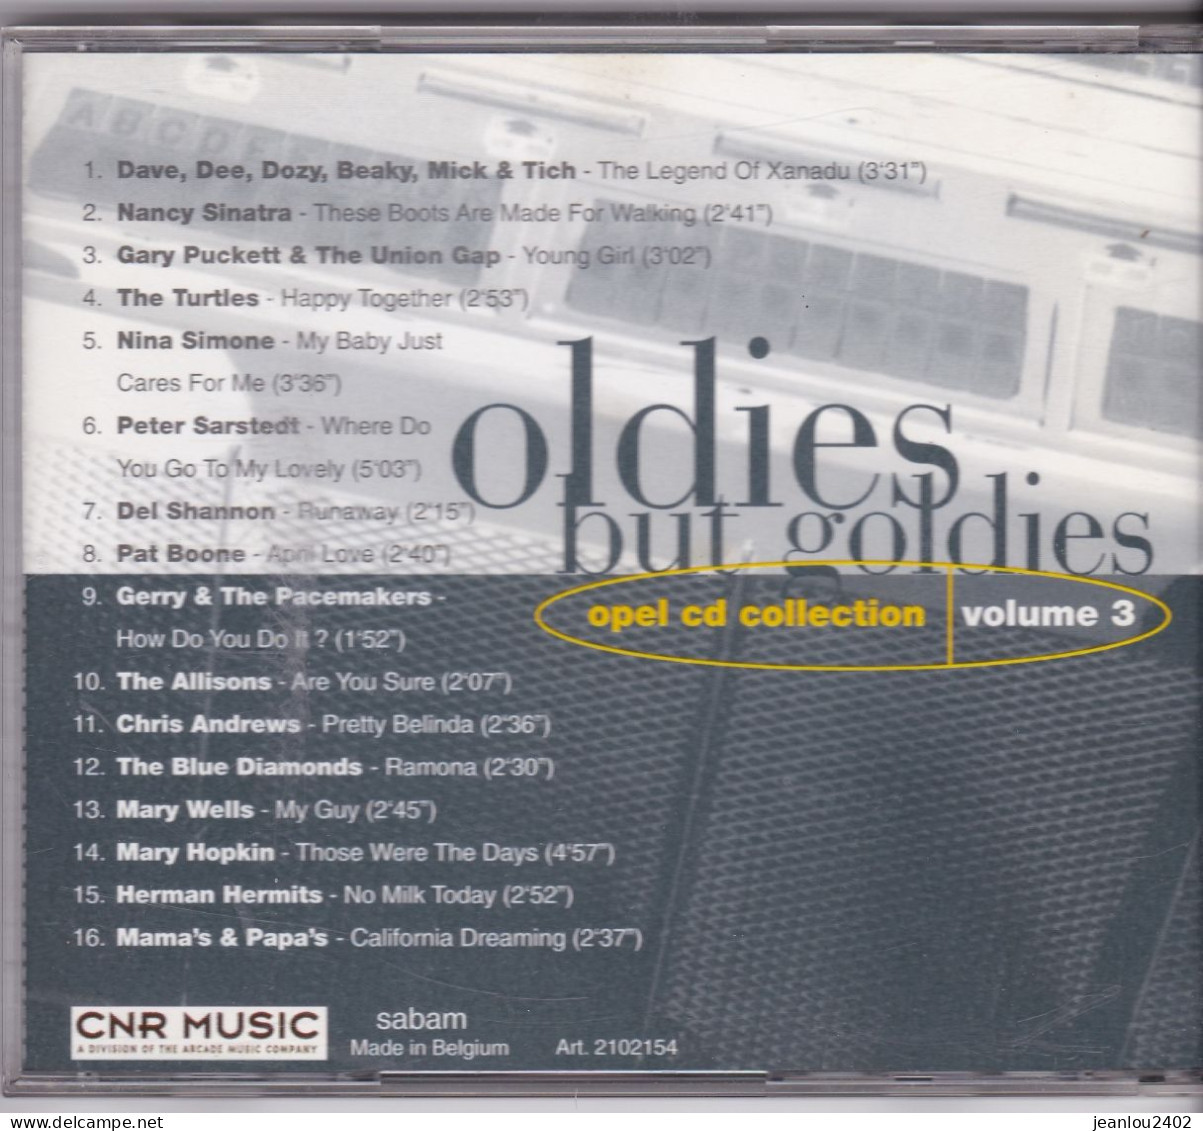 "OPEL CD COLLECTION VOLUME 3 " - "OLDIES BUT GOLDIES" - Collectors